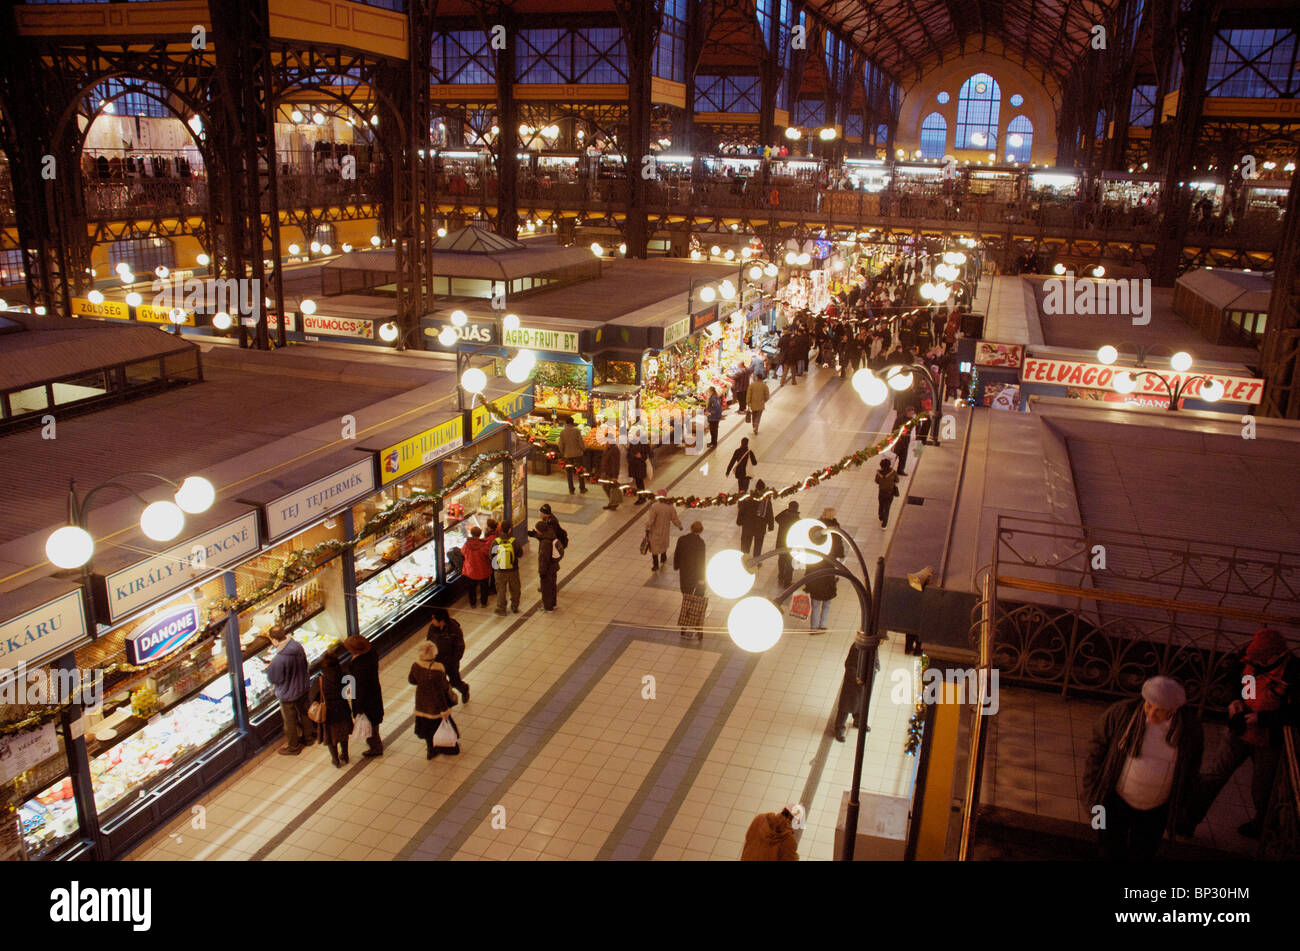 SHOPS AND STALLS IN THE CENTRAL MARKET HALL,BUDAPEST Stock Photo